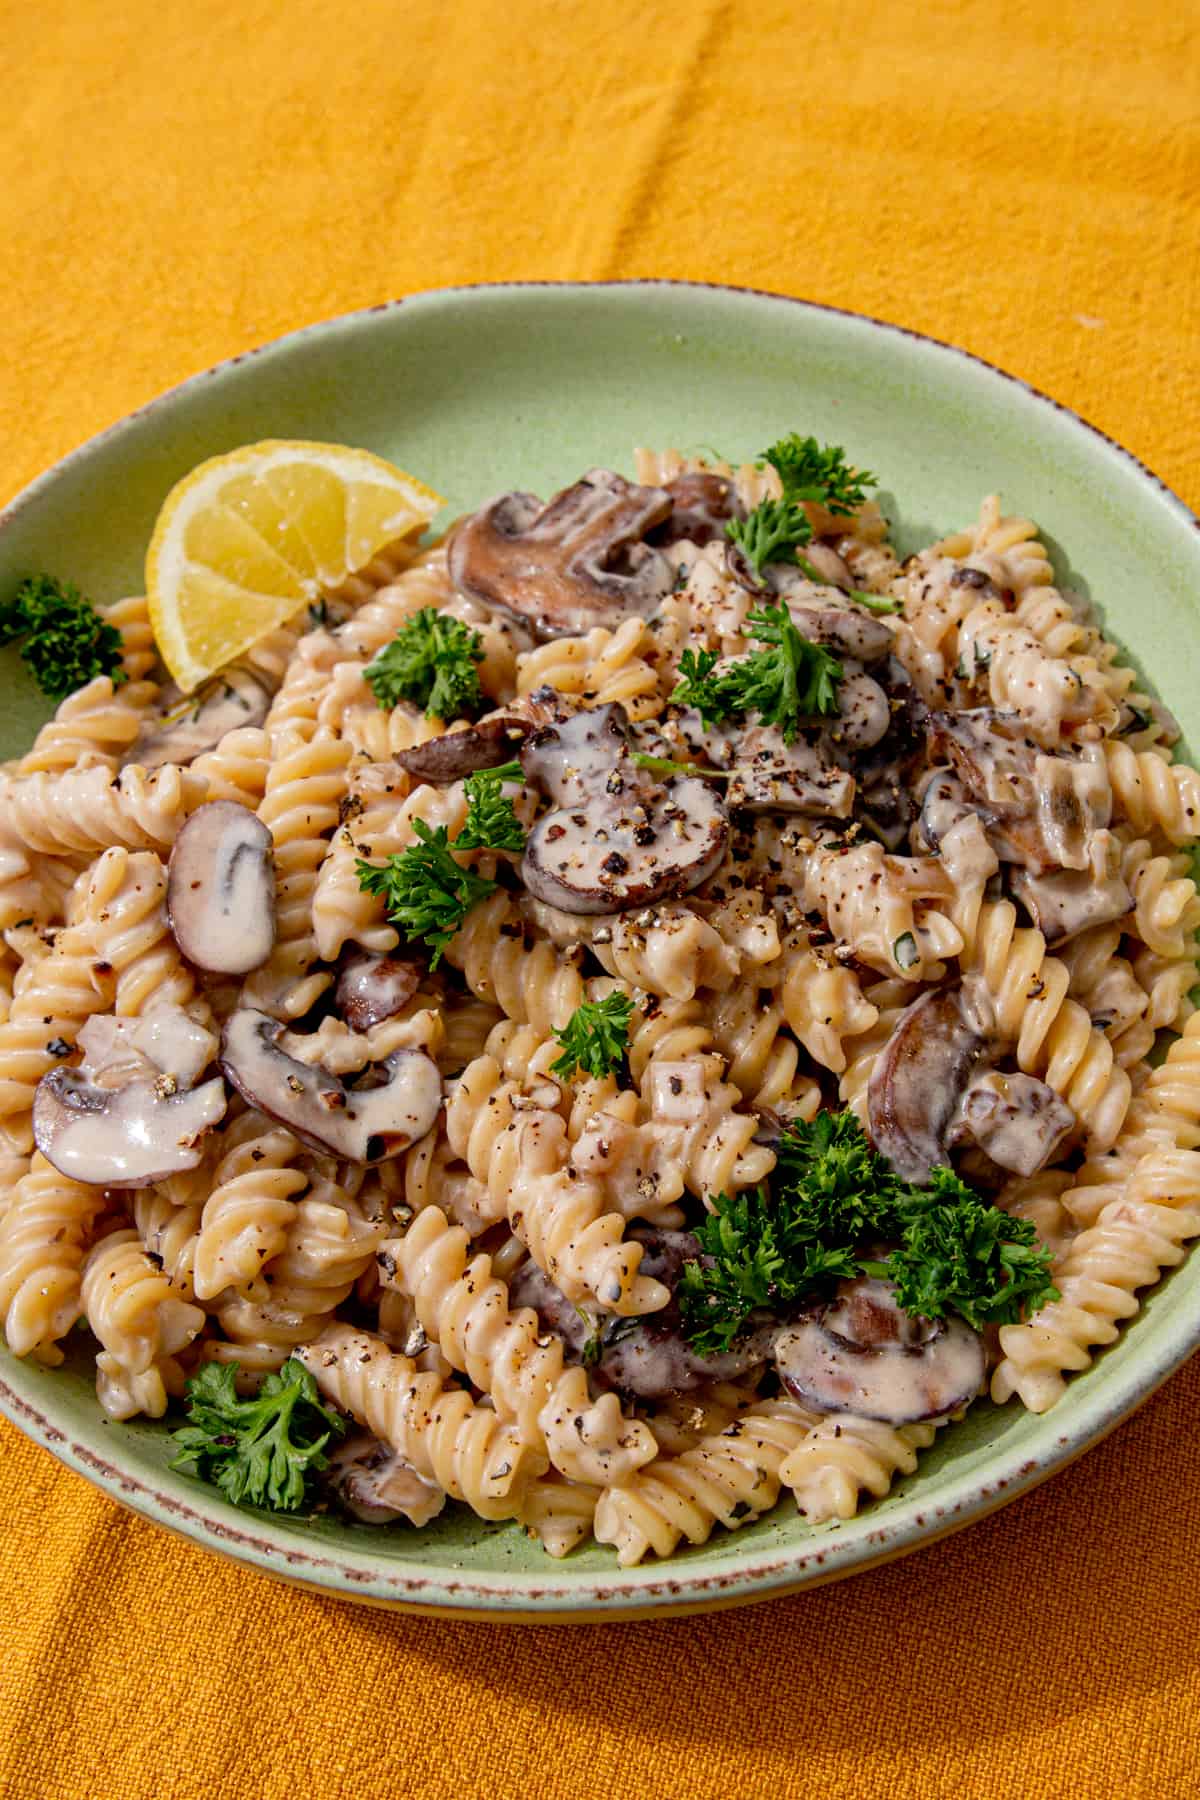 A pale green bowl with pasta and mushrooms in a sauce with a wedge of lemon.